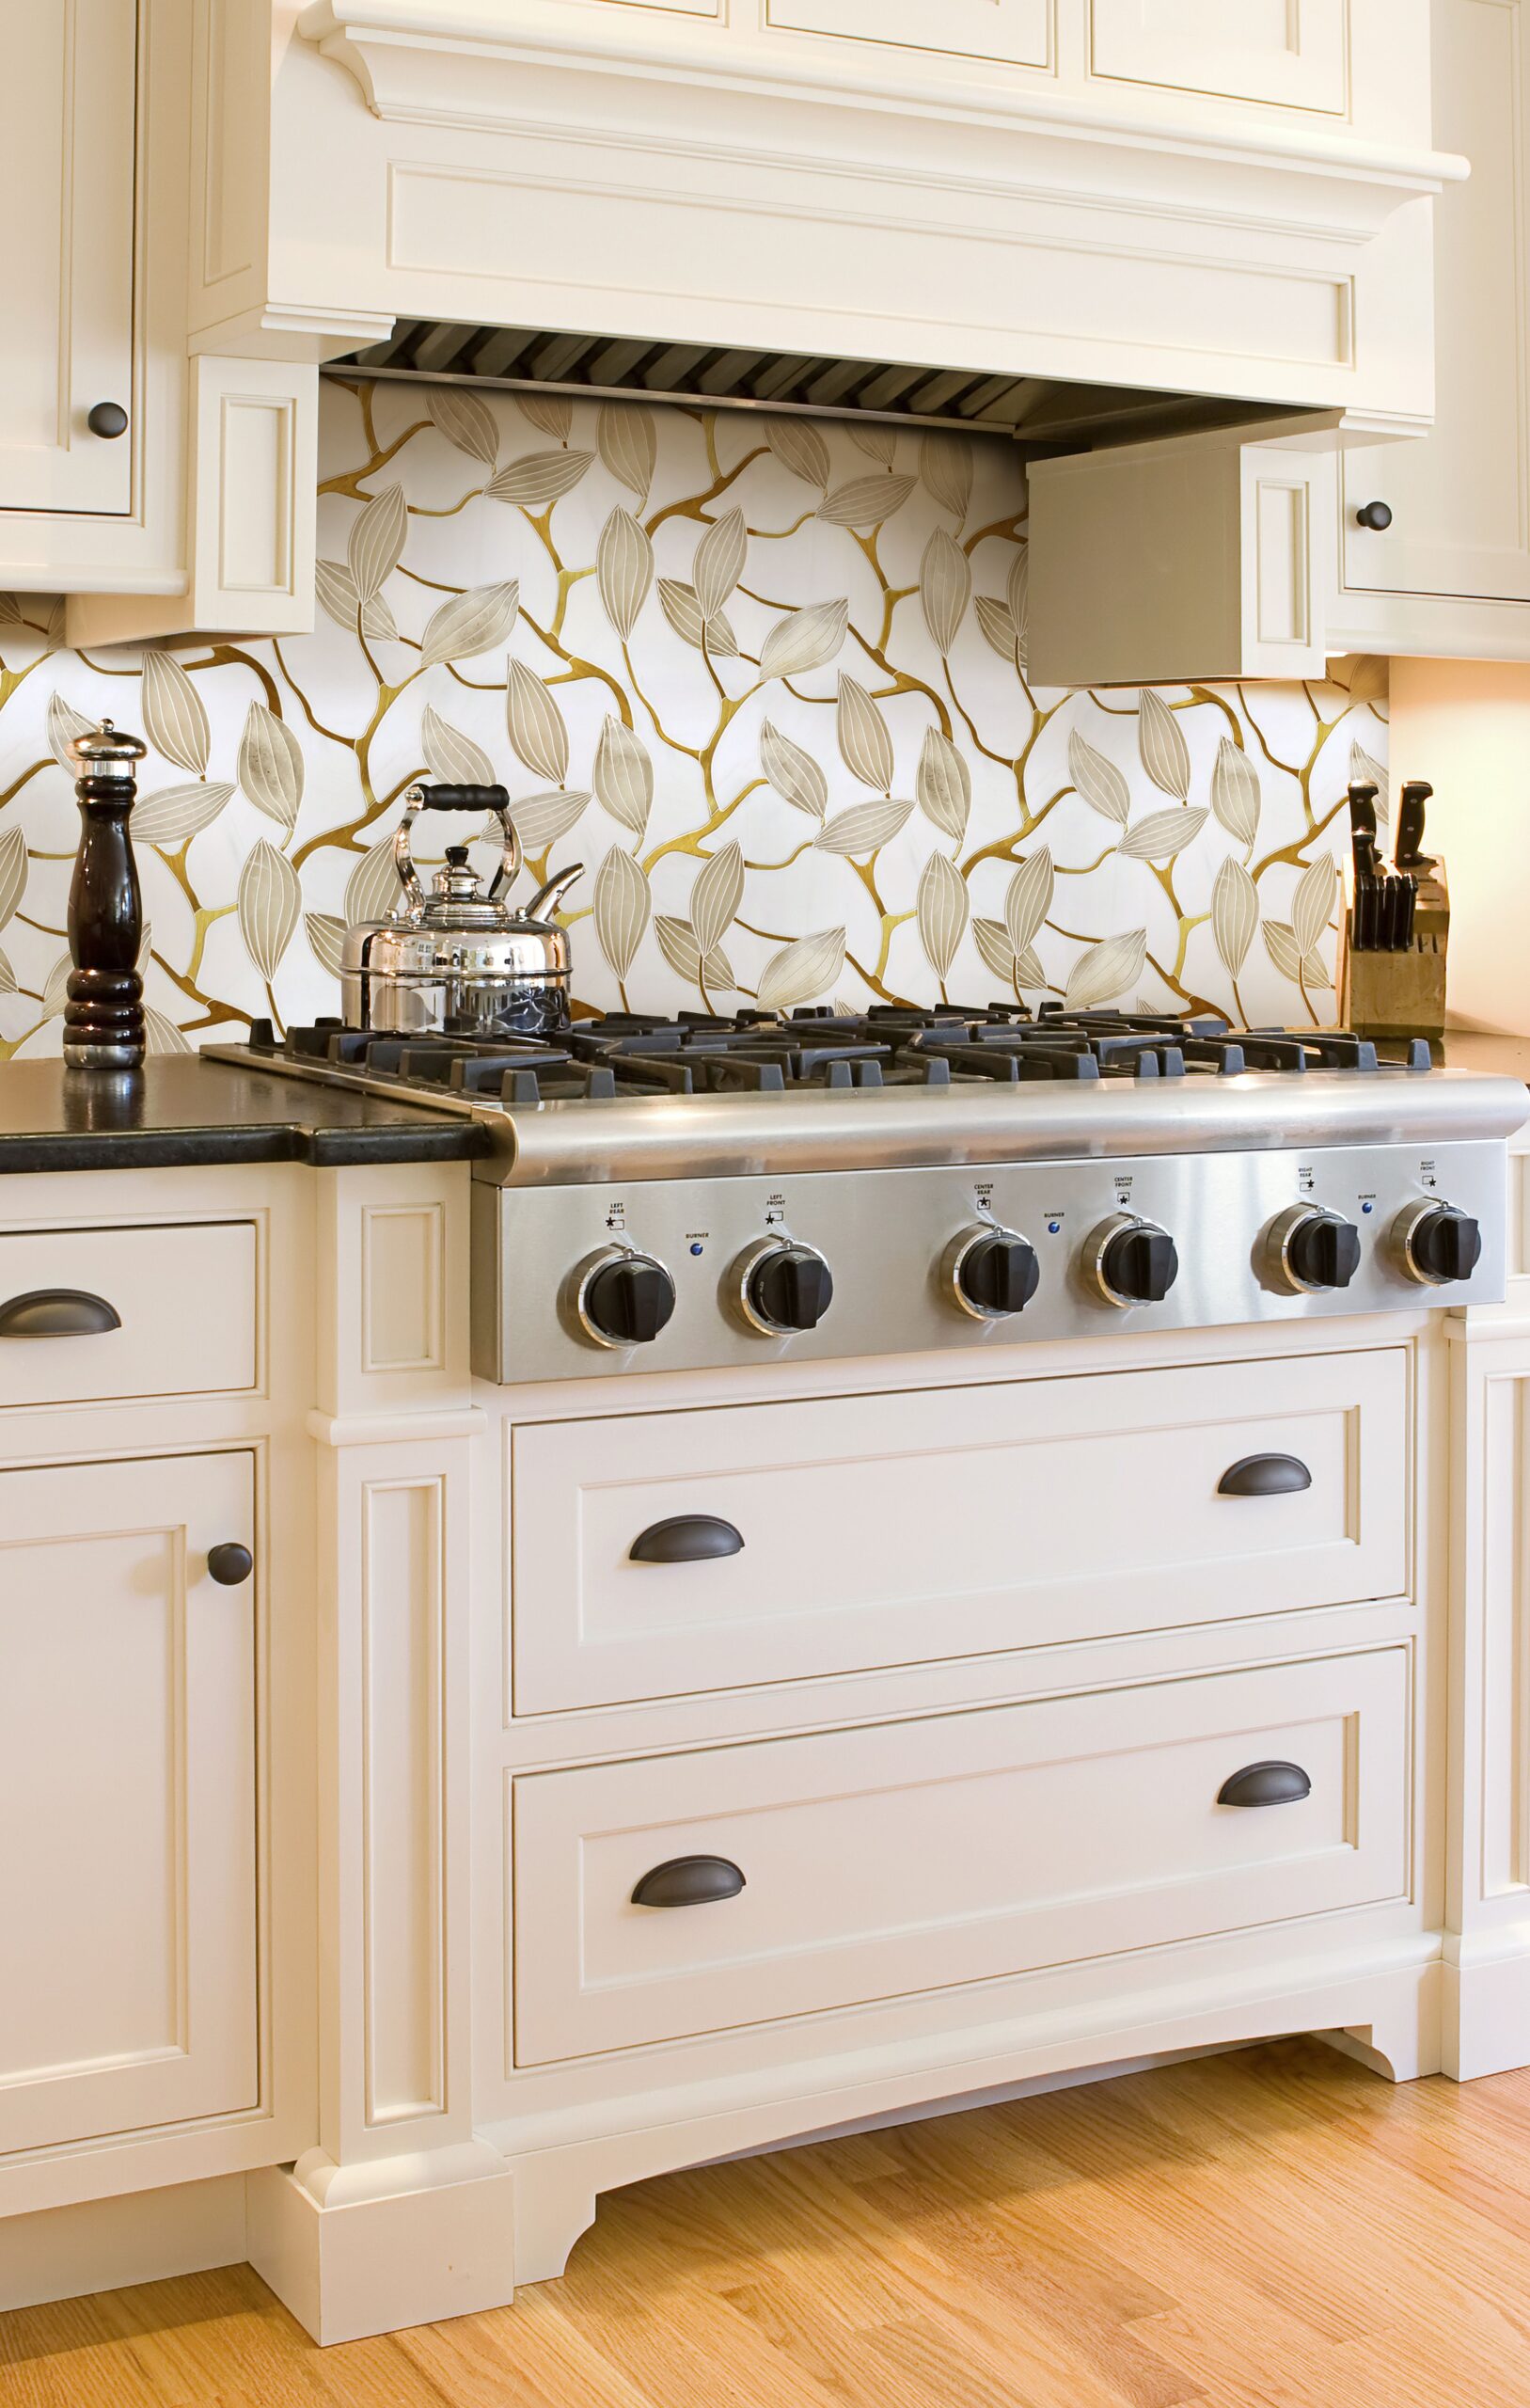 Creative Country Kitchen Tile Backsplash Ideas for Your Home